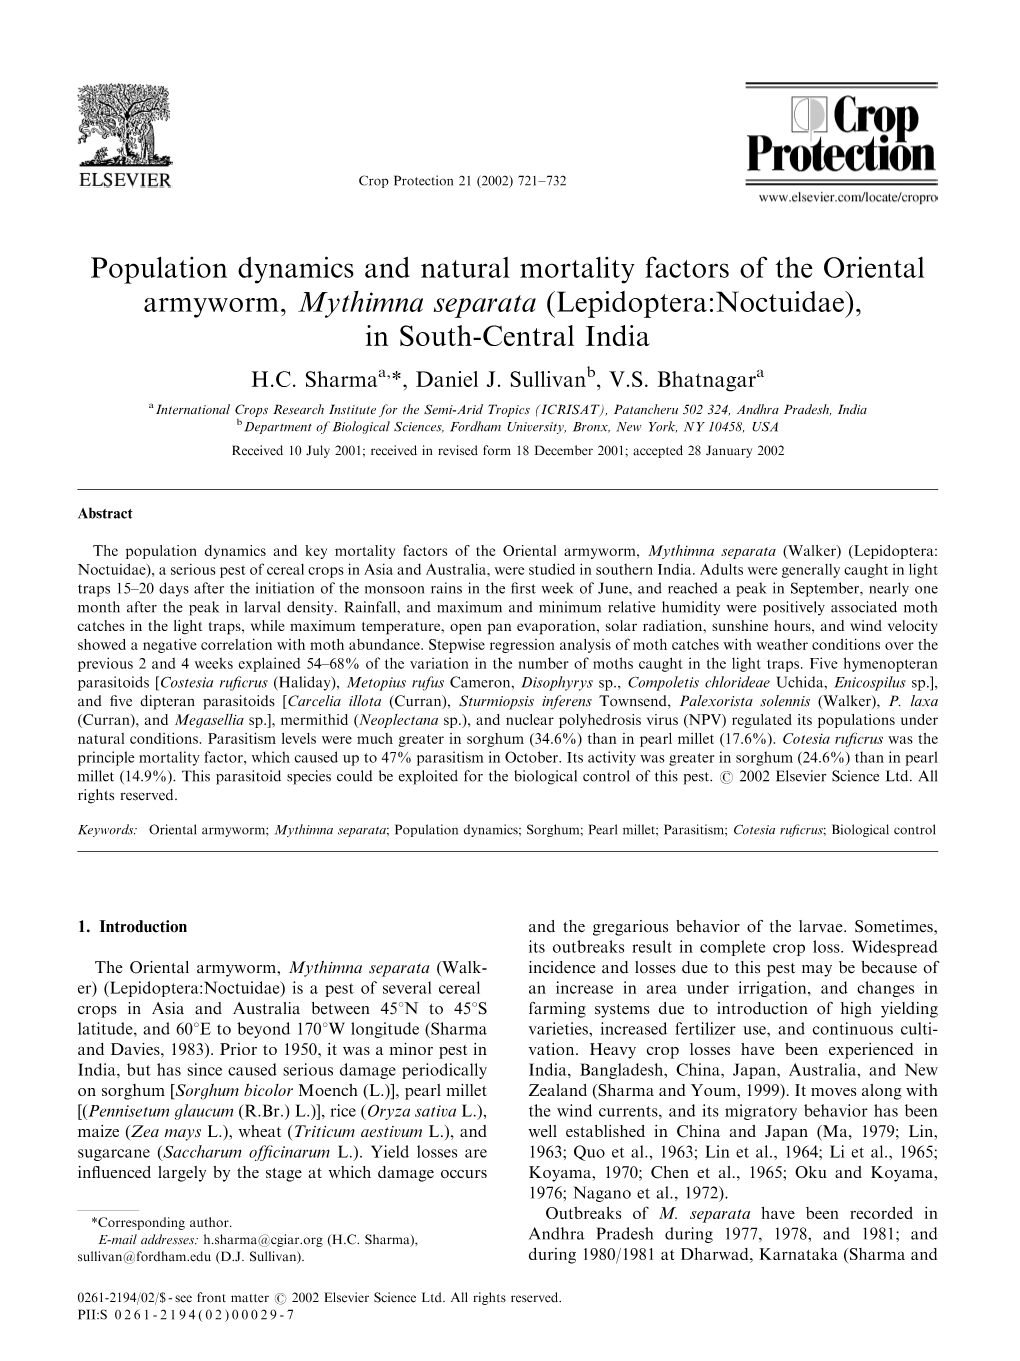 Population Dynamics and Natural Mortality Factors of the Oriental Armyworm, Mythimna Separata (Lepidoptera:Noctuidae), in South-Central India H.C